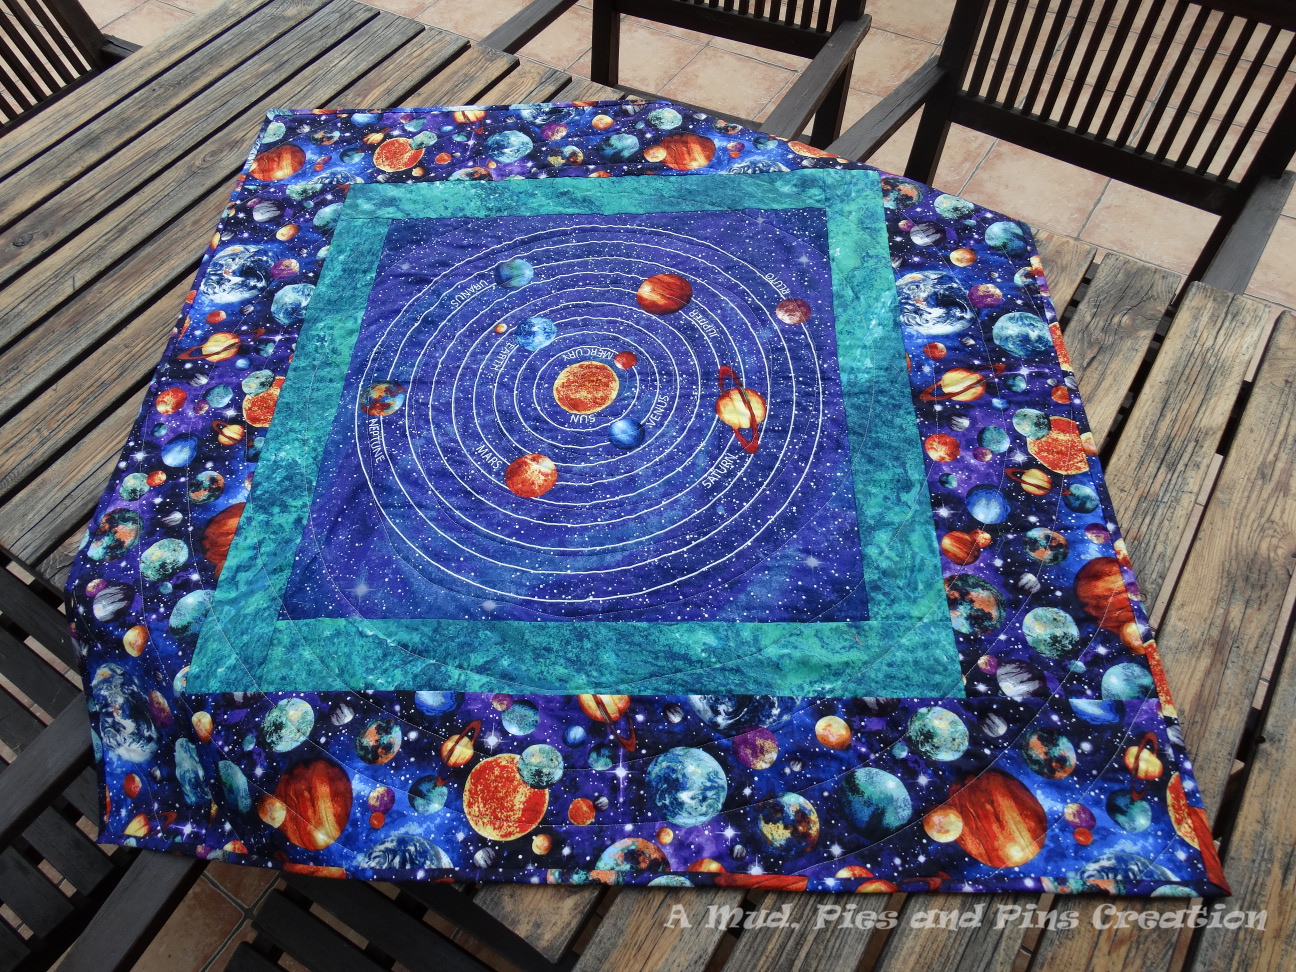 "Out of This World" quilt | Mud, Pies and Pins